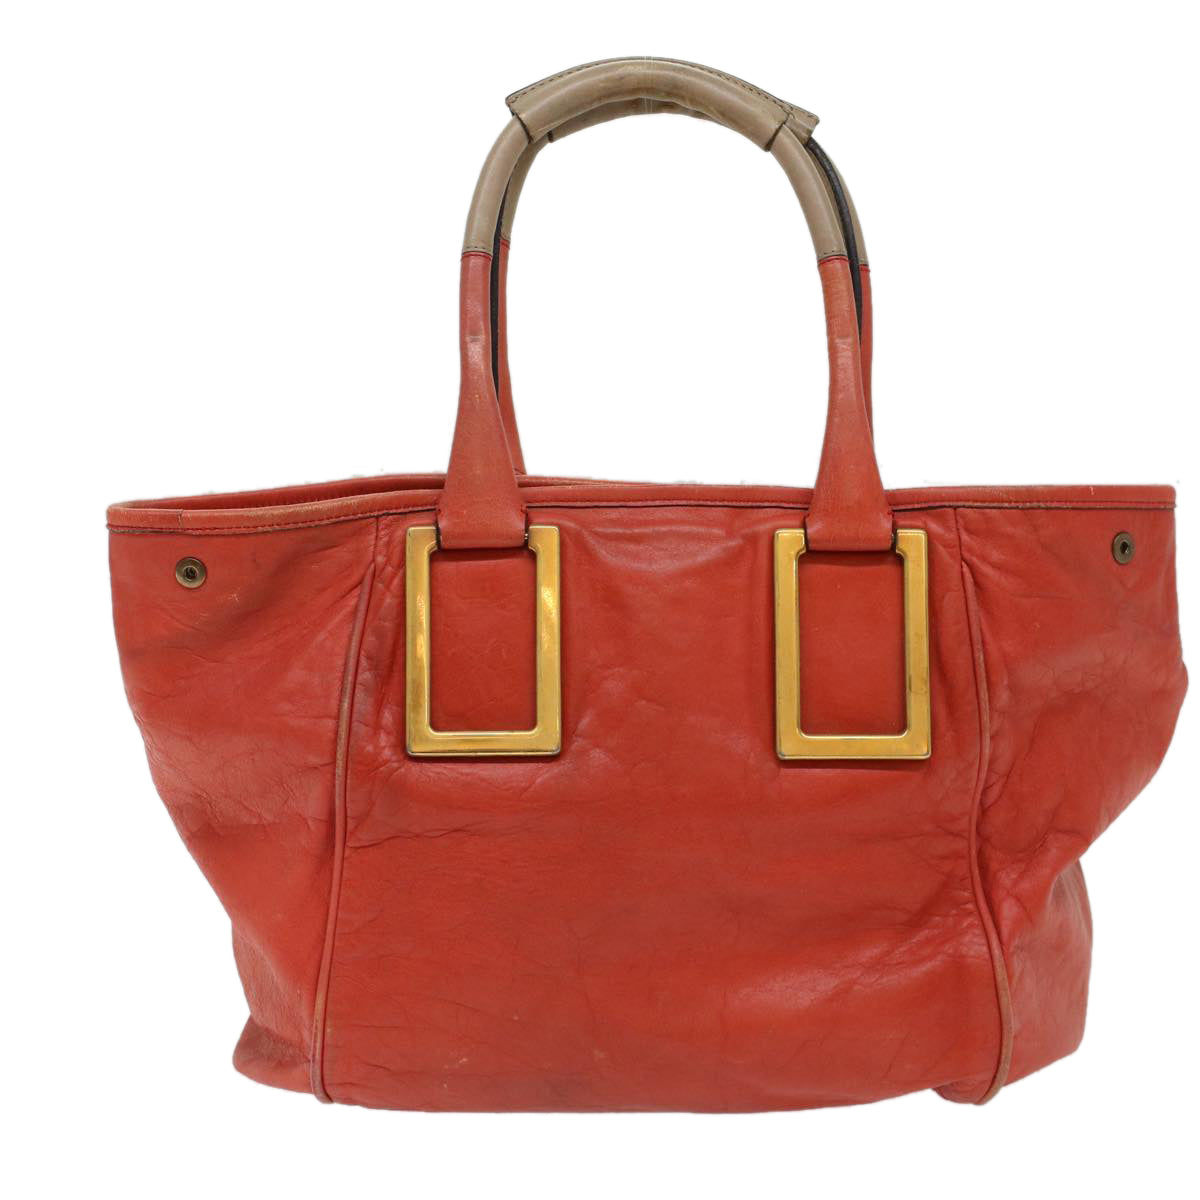 Chloe Etel Hand Bag Leather Red 04-12-50-65 Auth bs7428 - 0